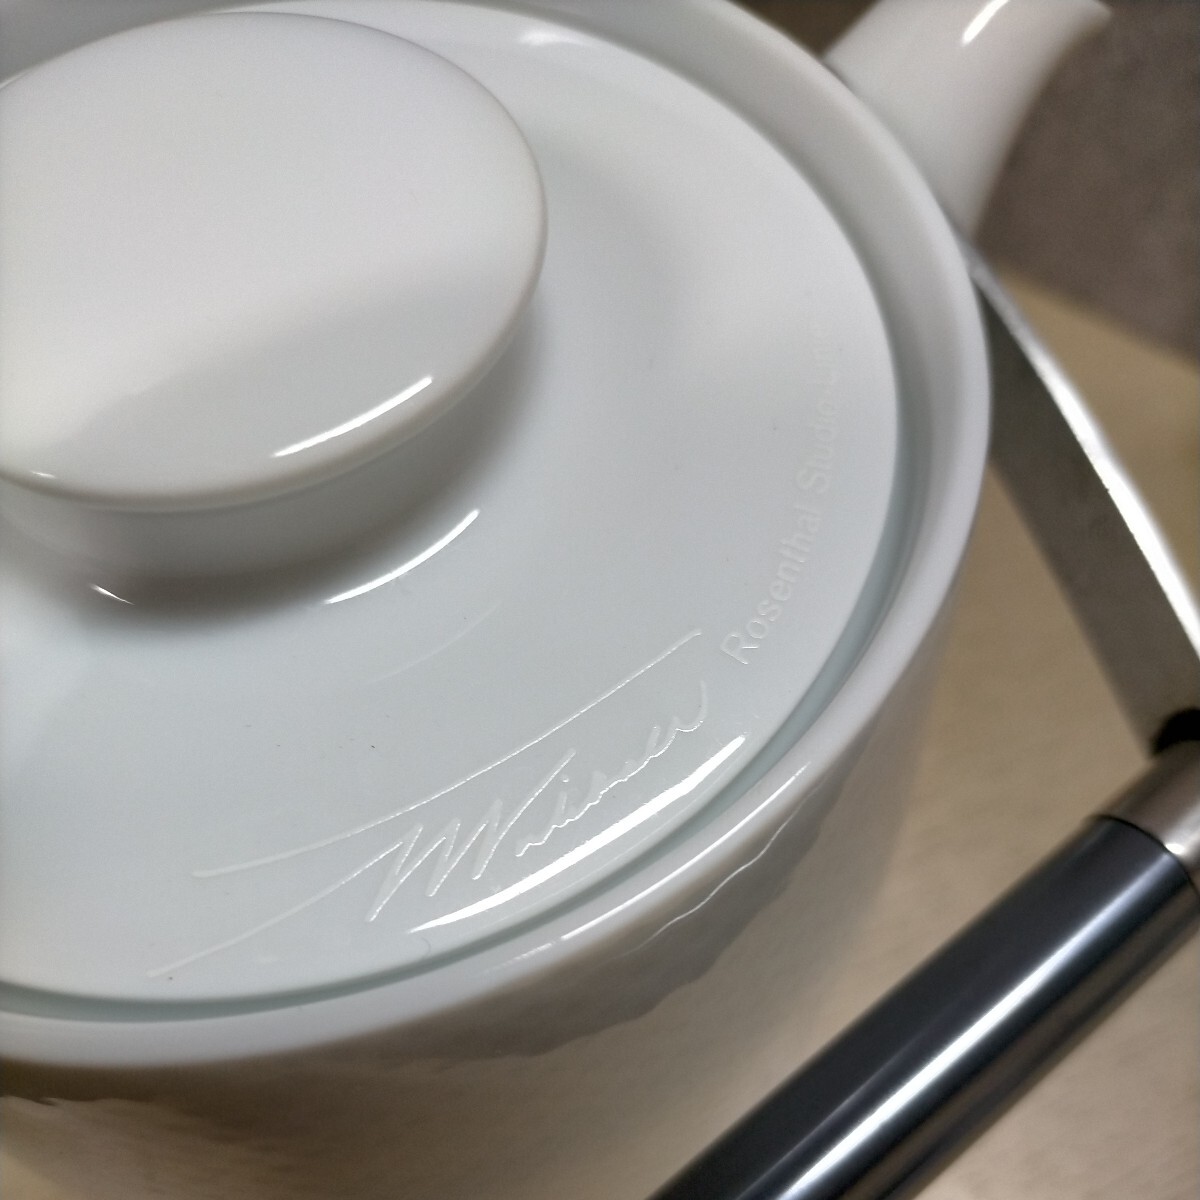  Rosenthal Studio line CENTURY 100 anniversary commemoration pot Tapio wirkkala^ used / small scratch the smallest dirt / present condition delivery /NC./ in the image verification ./ size is postscript 